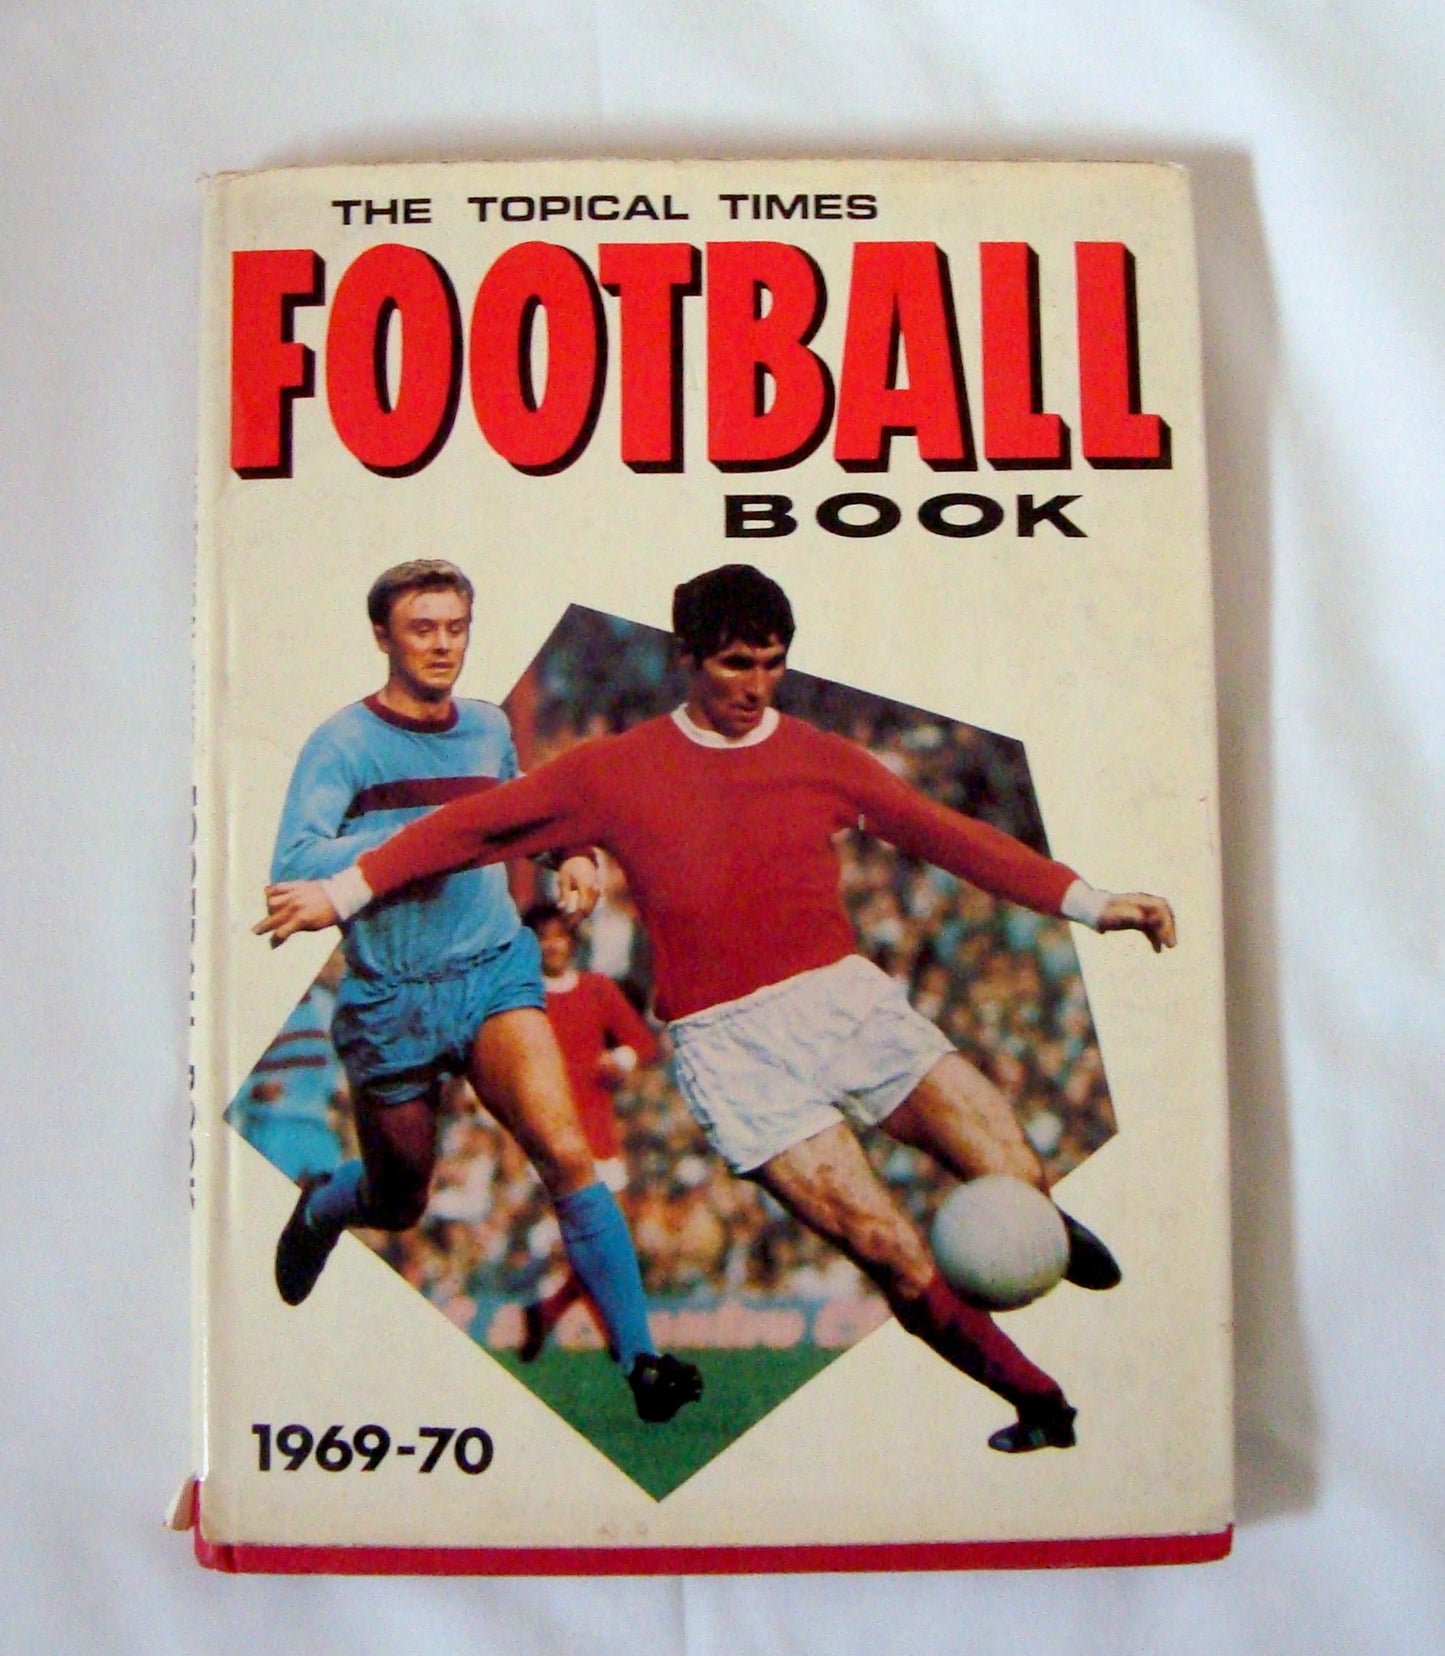 The Topical Times Football Book 1969-70